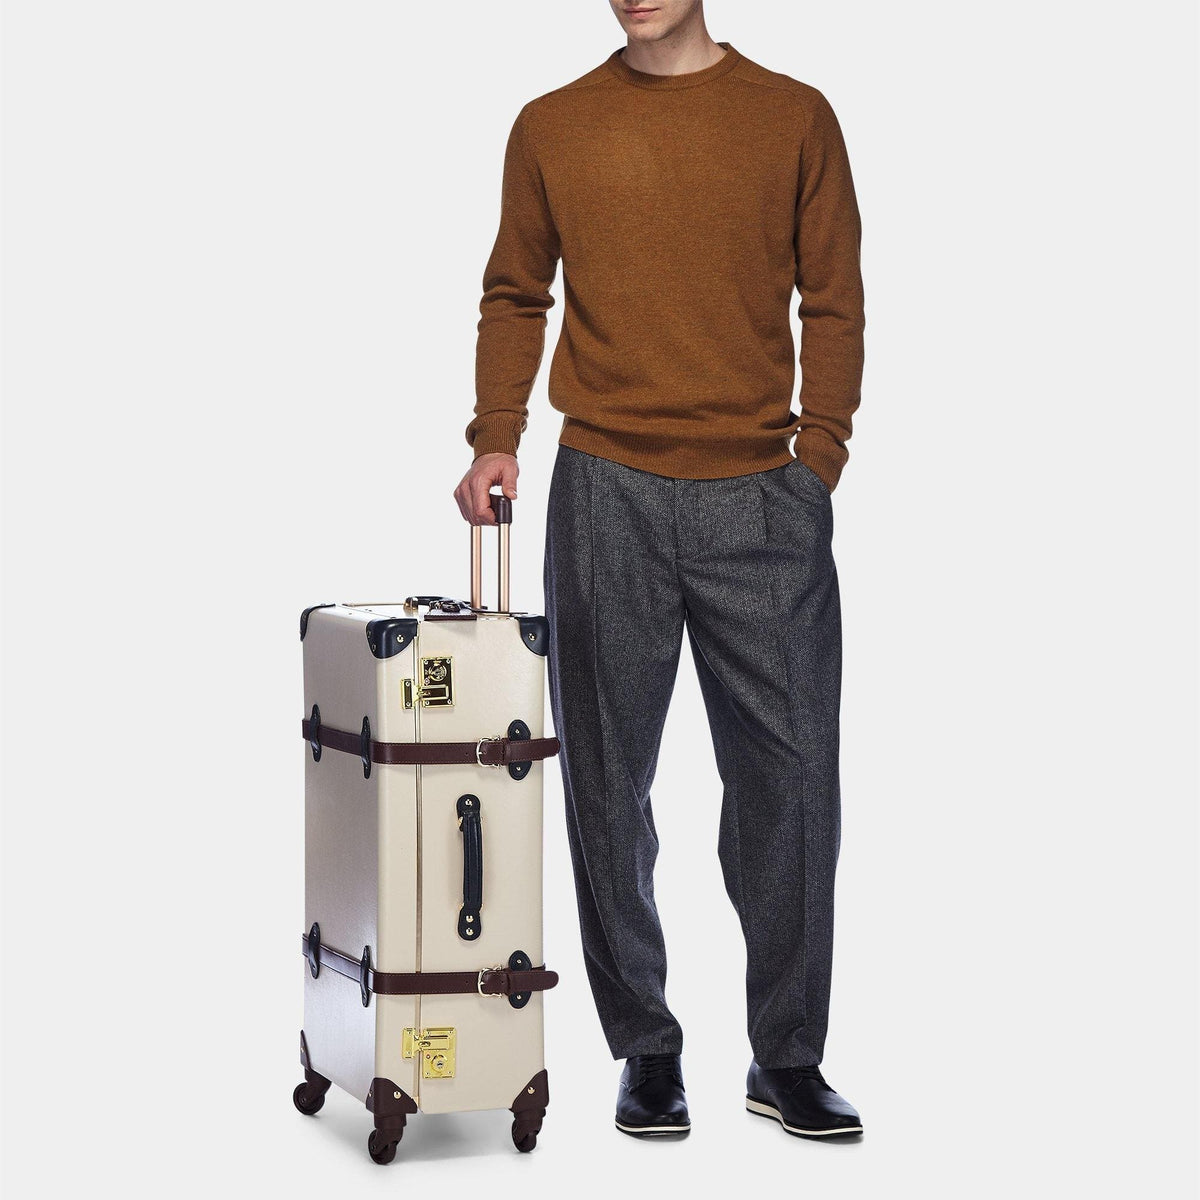 The Architect - Cream Check In Spinner Spinner Steamline Luggage 